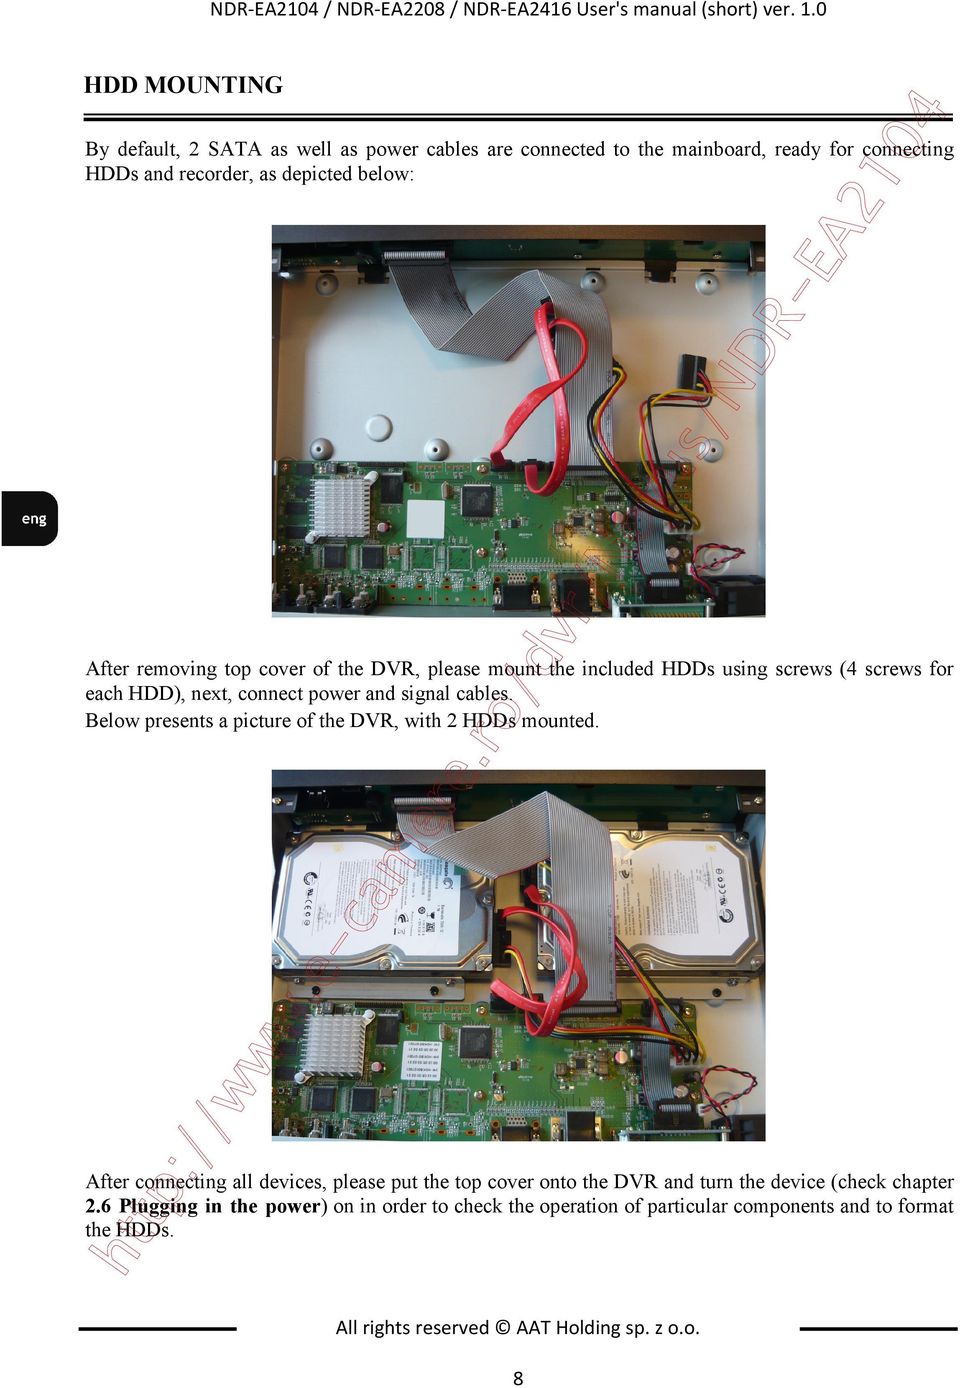 cover of the DVR, please mount the included HDDs using screws (4 screws for each HDD), next, connect power and signal cables.